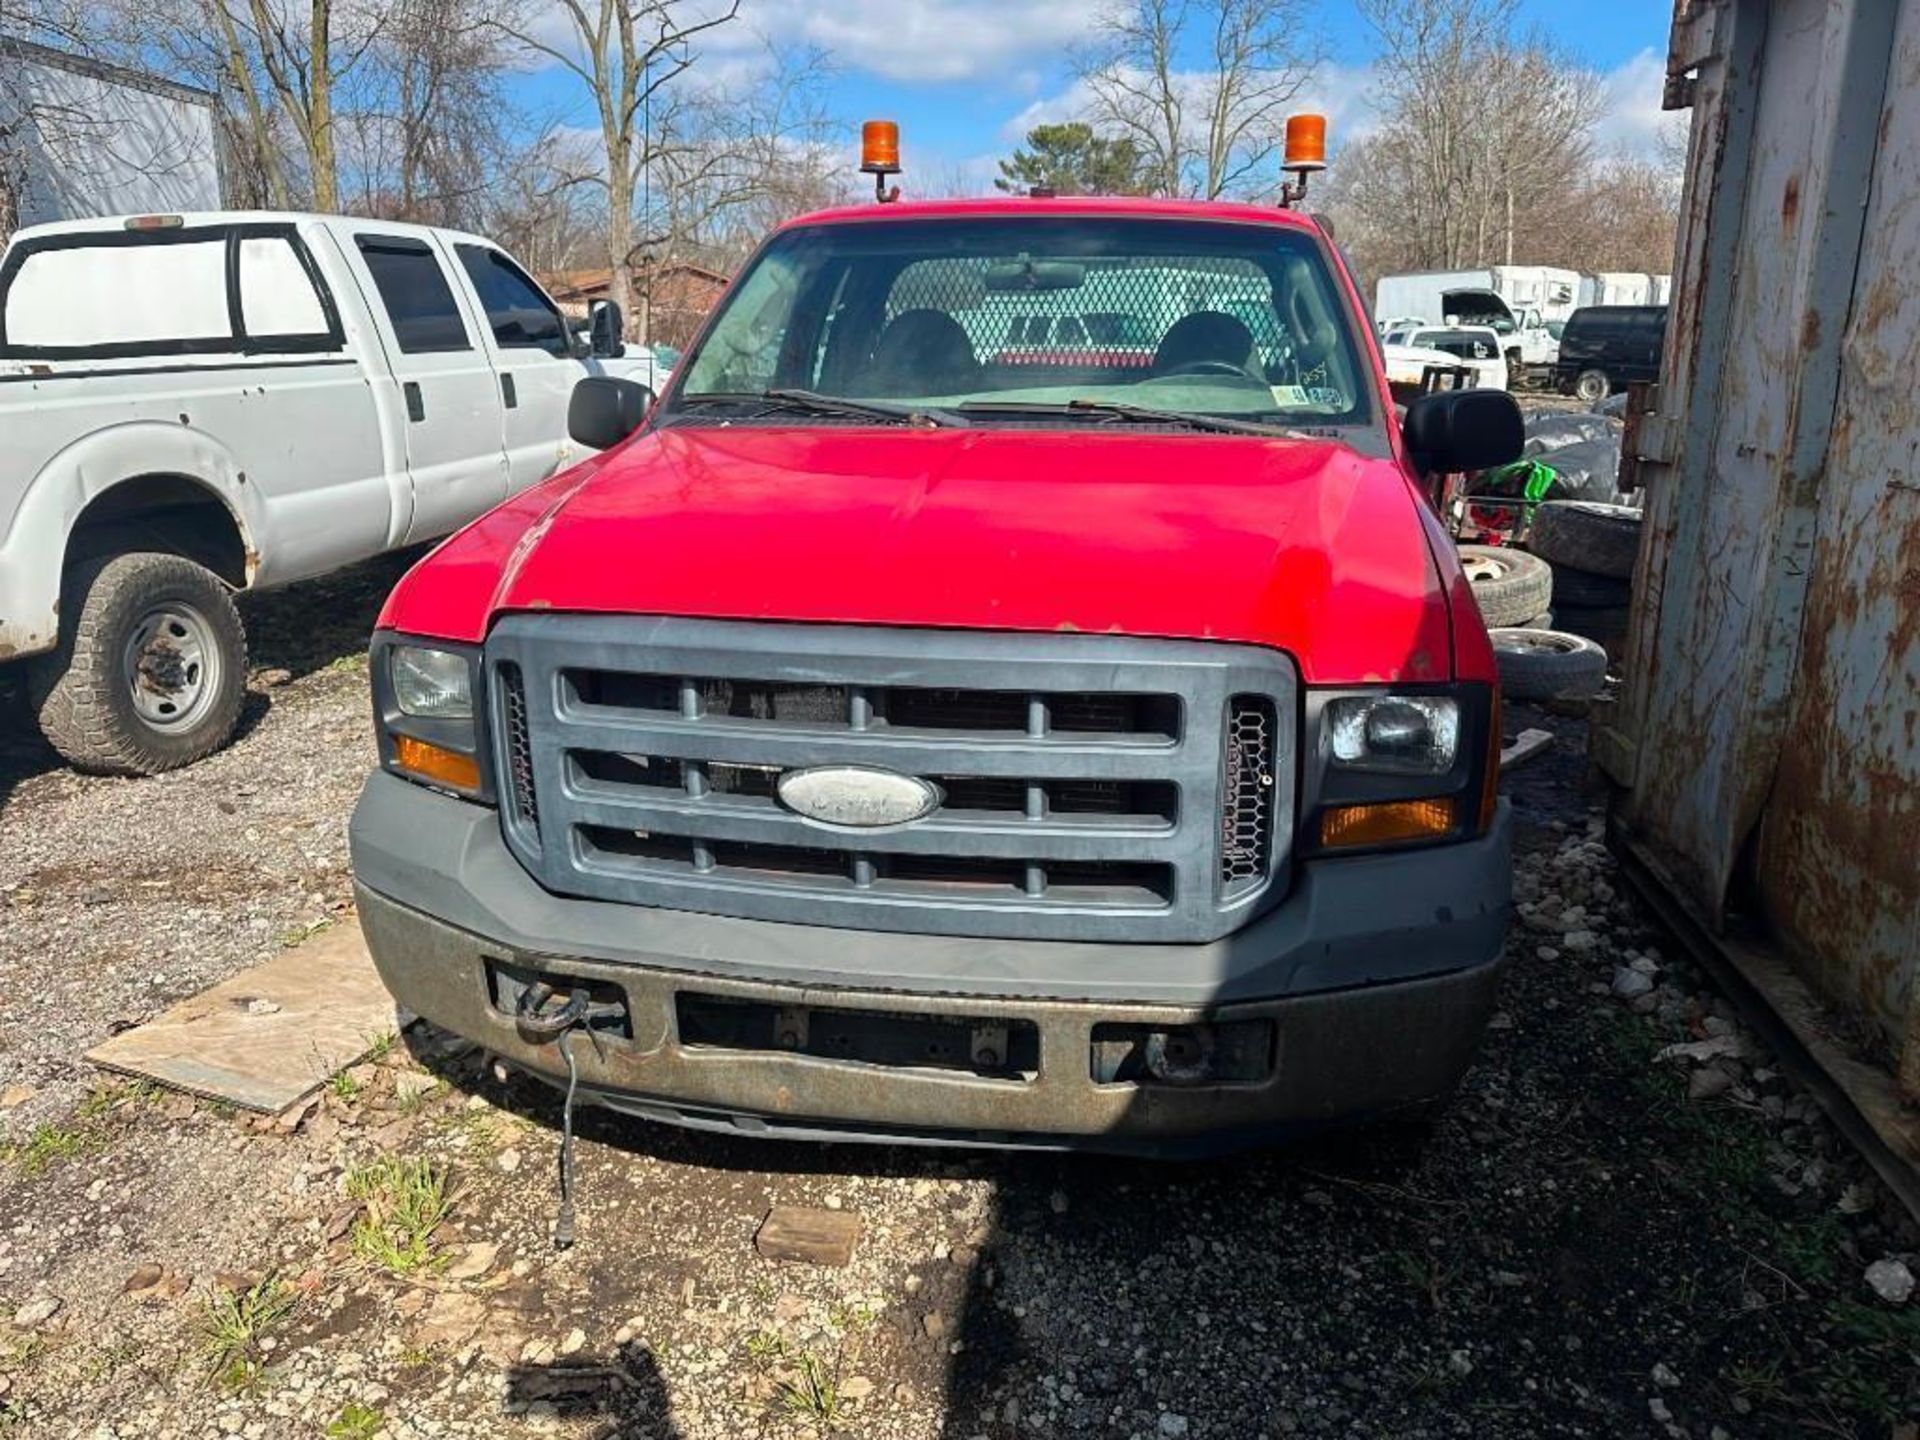 2007 Ford F-250 Pickup Truck (located off-site, please read description) - Image 2 of 10